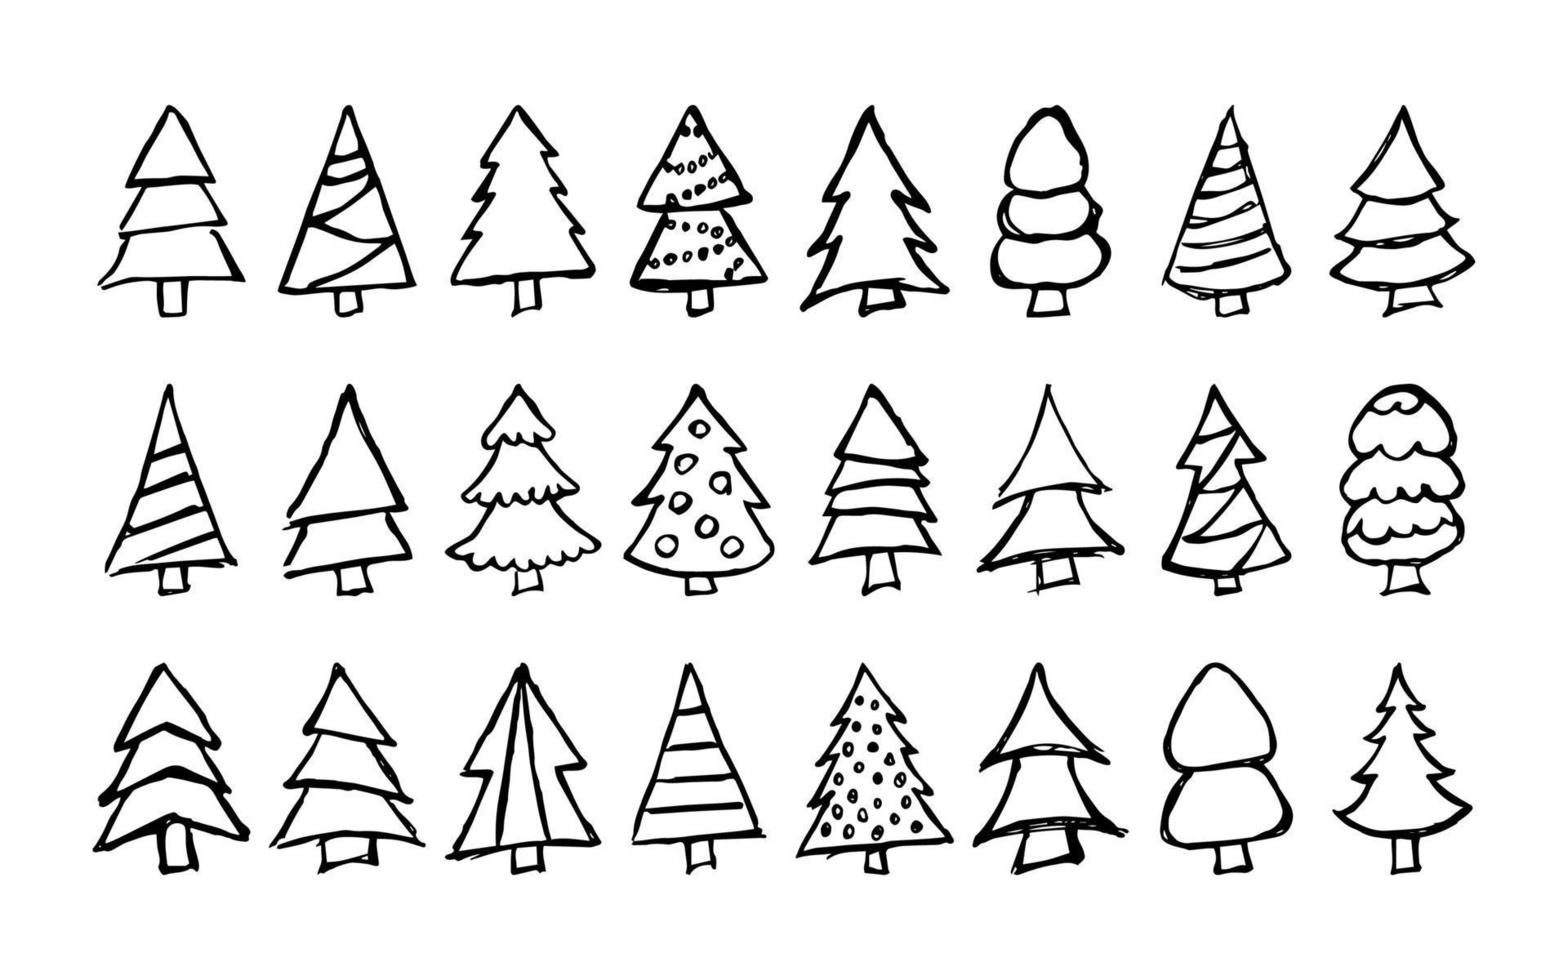 Hand drawn Christmas trees. Set of sixteen monochrome sketched illustrations of firs. Winter holiday doodle elements. Vector illustration